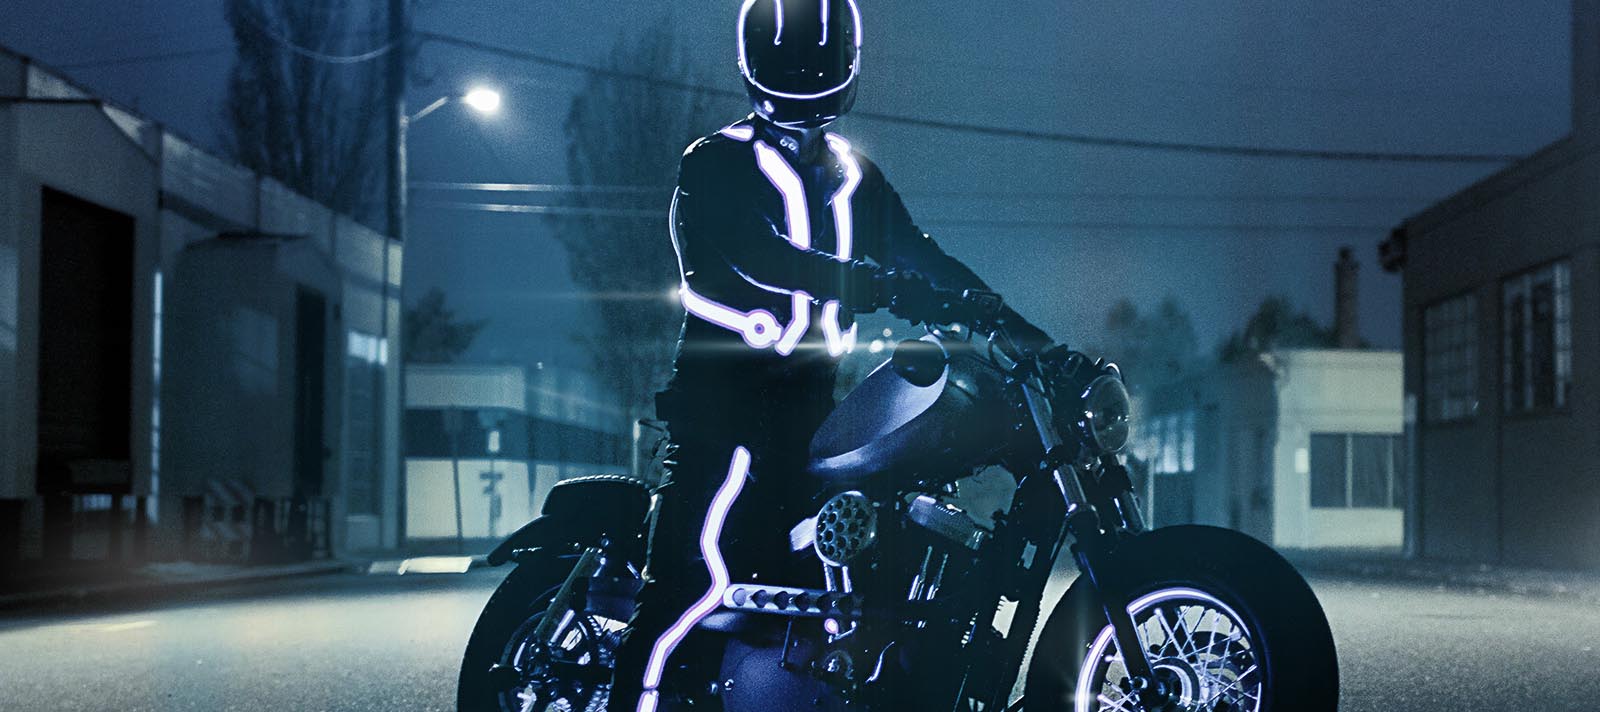 vynel on helmet and motorcycle suit